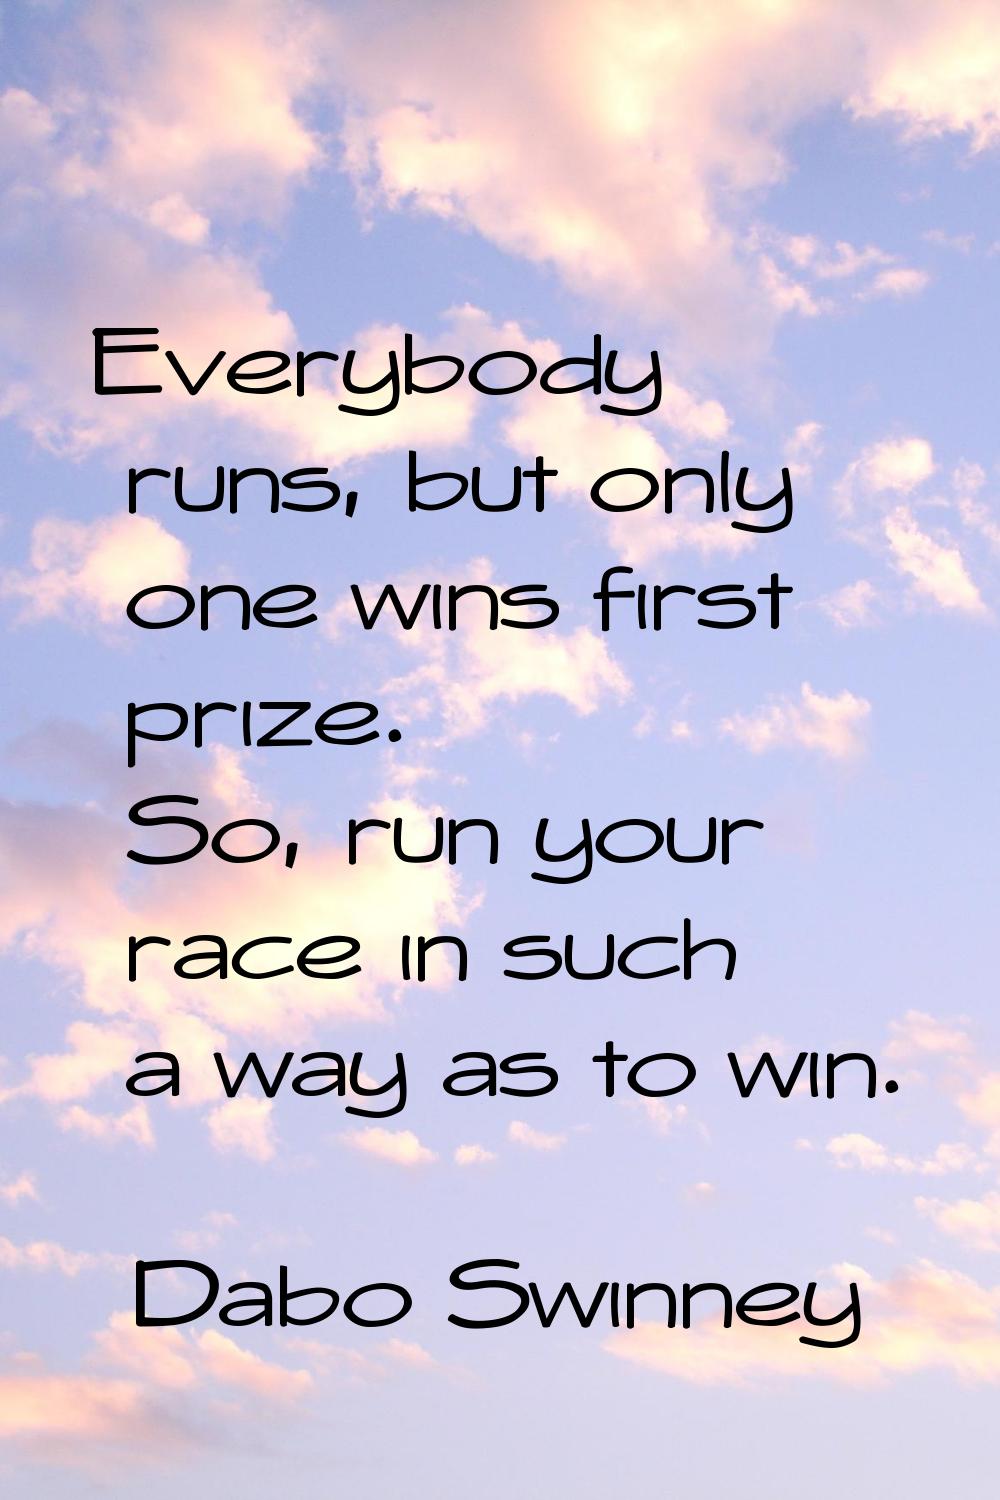 Everybody runs, but only one wins first prize. So, run your race in such a way as to win.